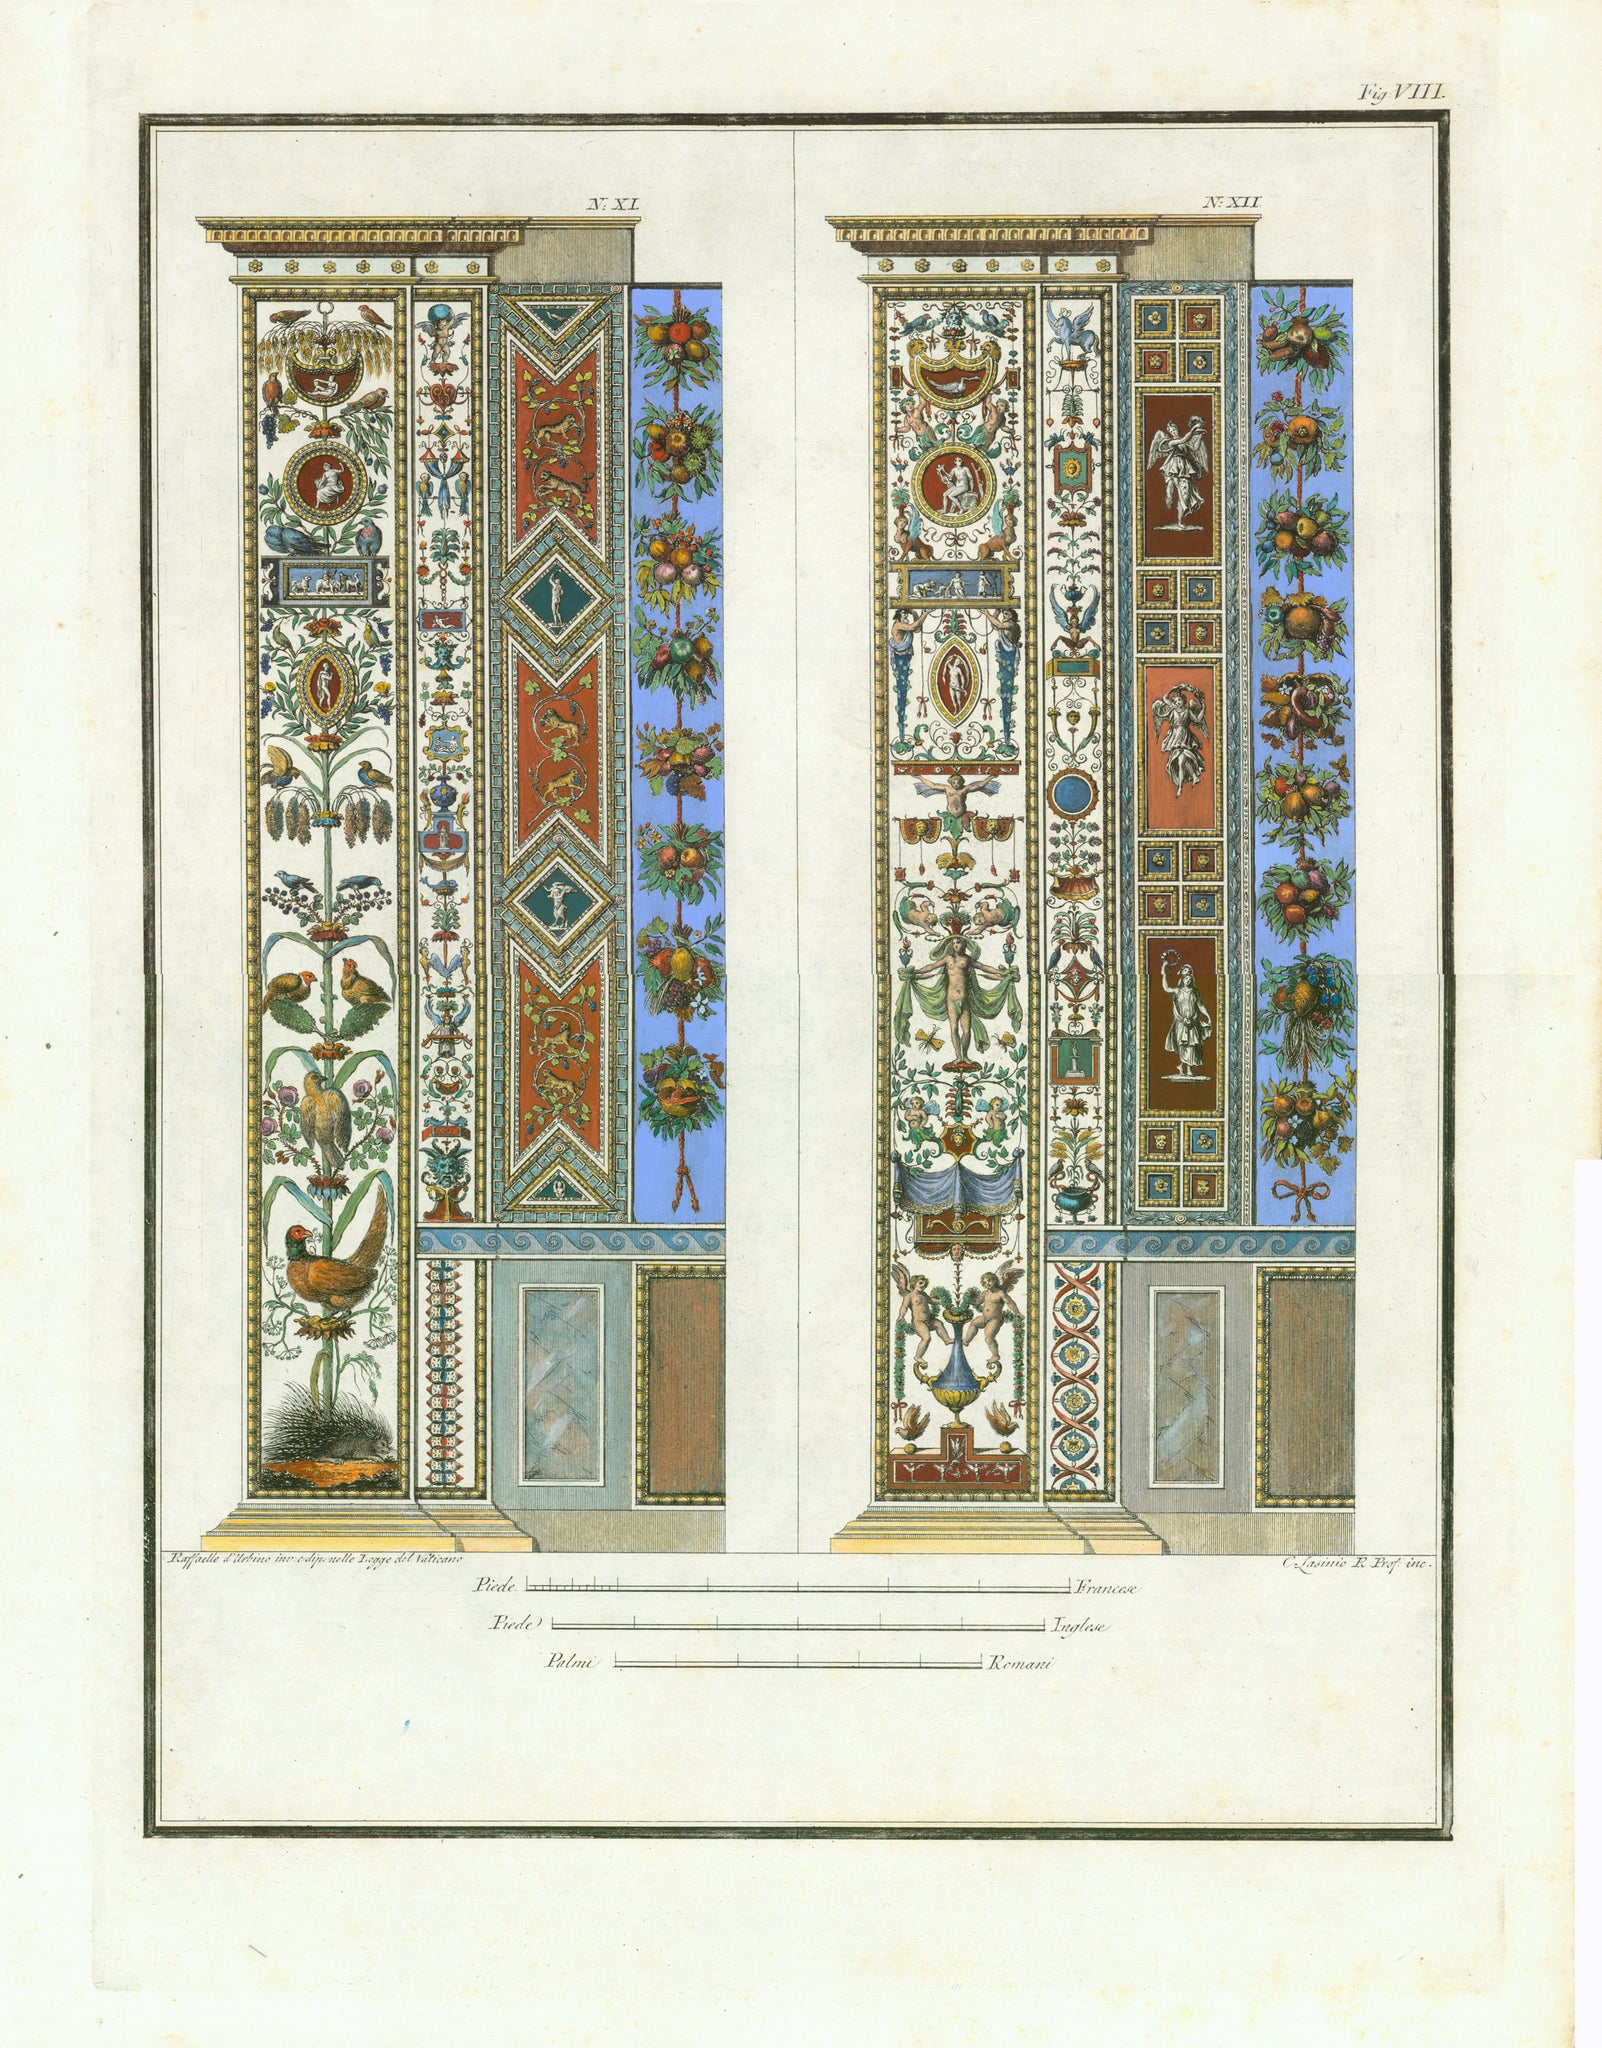 The copper etchings were printed in Rome in the year 1802. They have brilliant gouache-hand-coloring, attentively executed even in the smallest detail. The full page size measures ca. 54.5 x 41.5 cm ( 21.5 x 13.4"). An exquisite wall decoration for the discriminating homeowner!